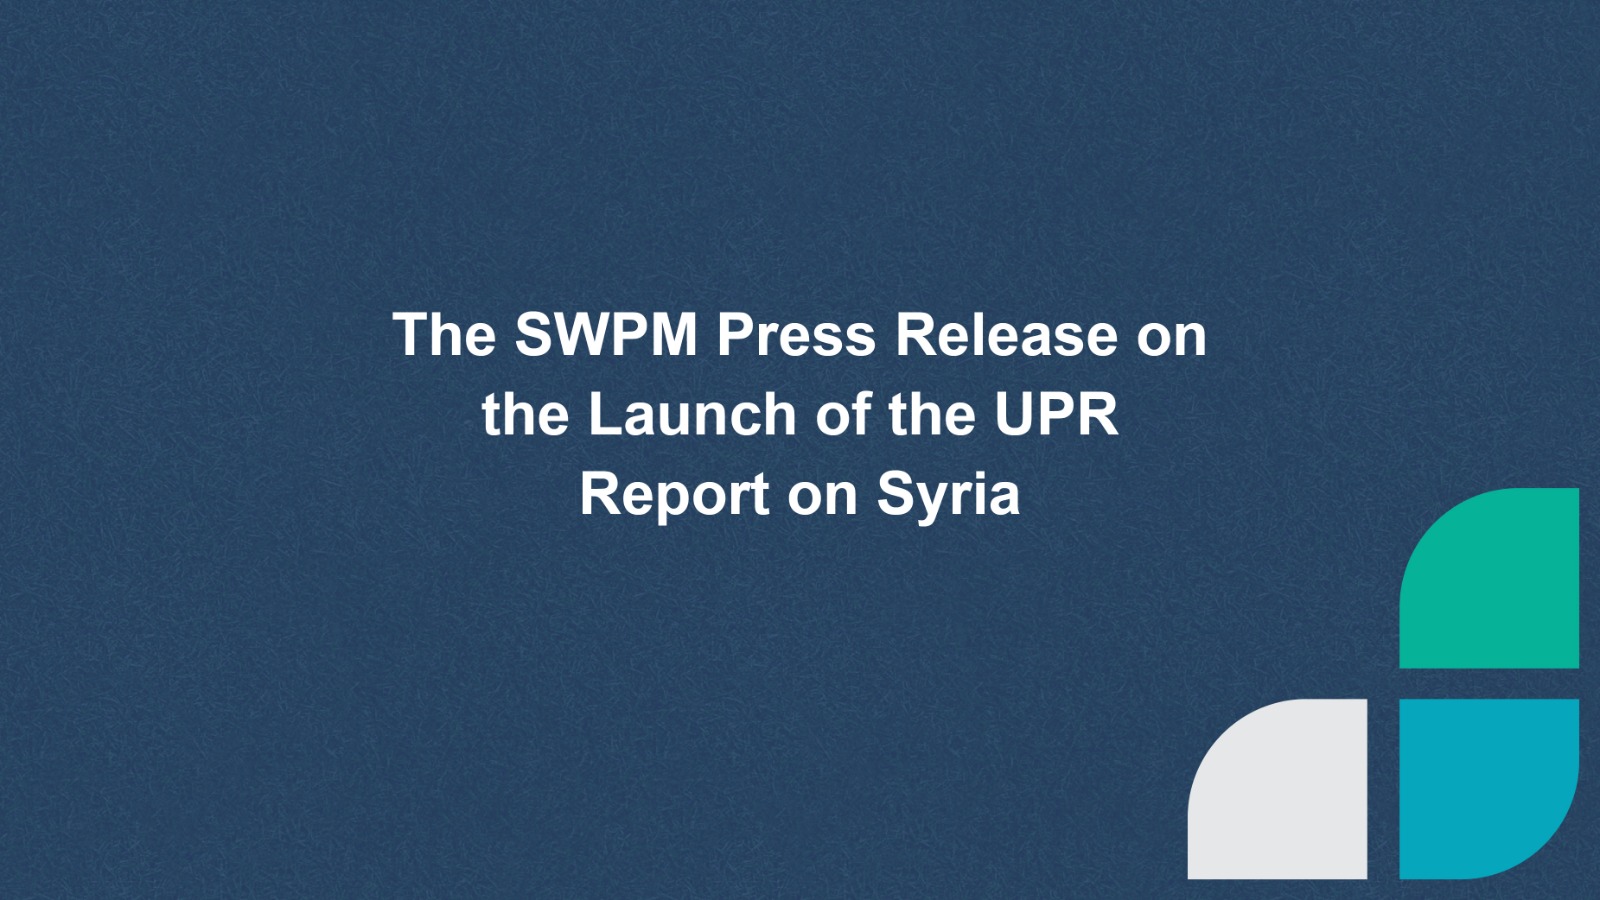 The SWPM Press Release on the Launch of the UPR Report on Syria